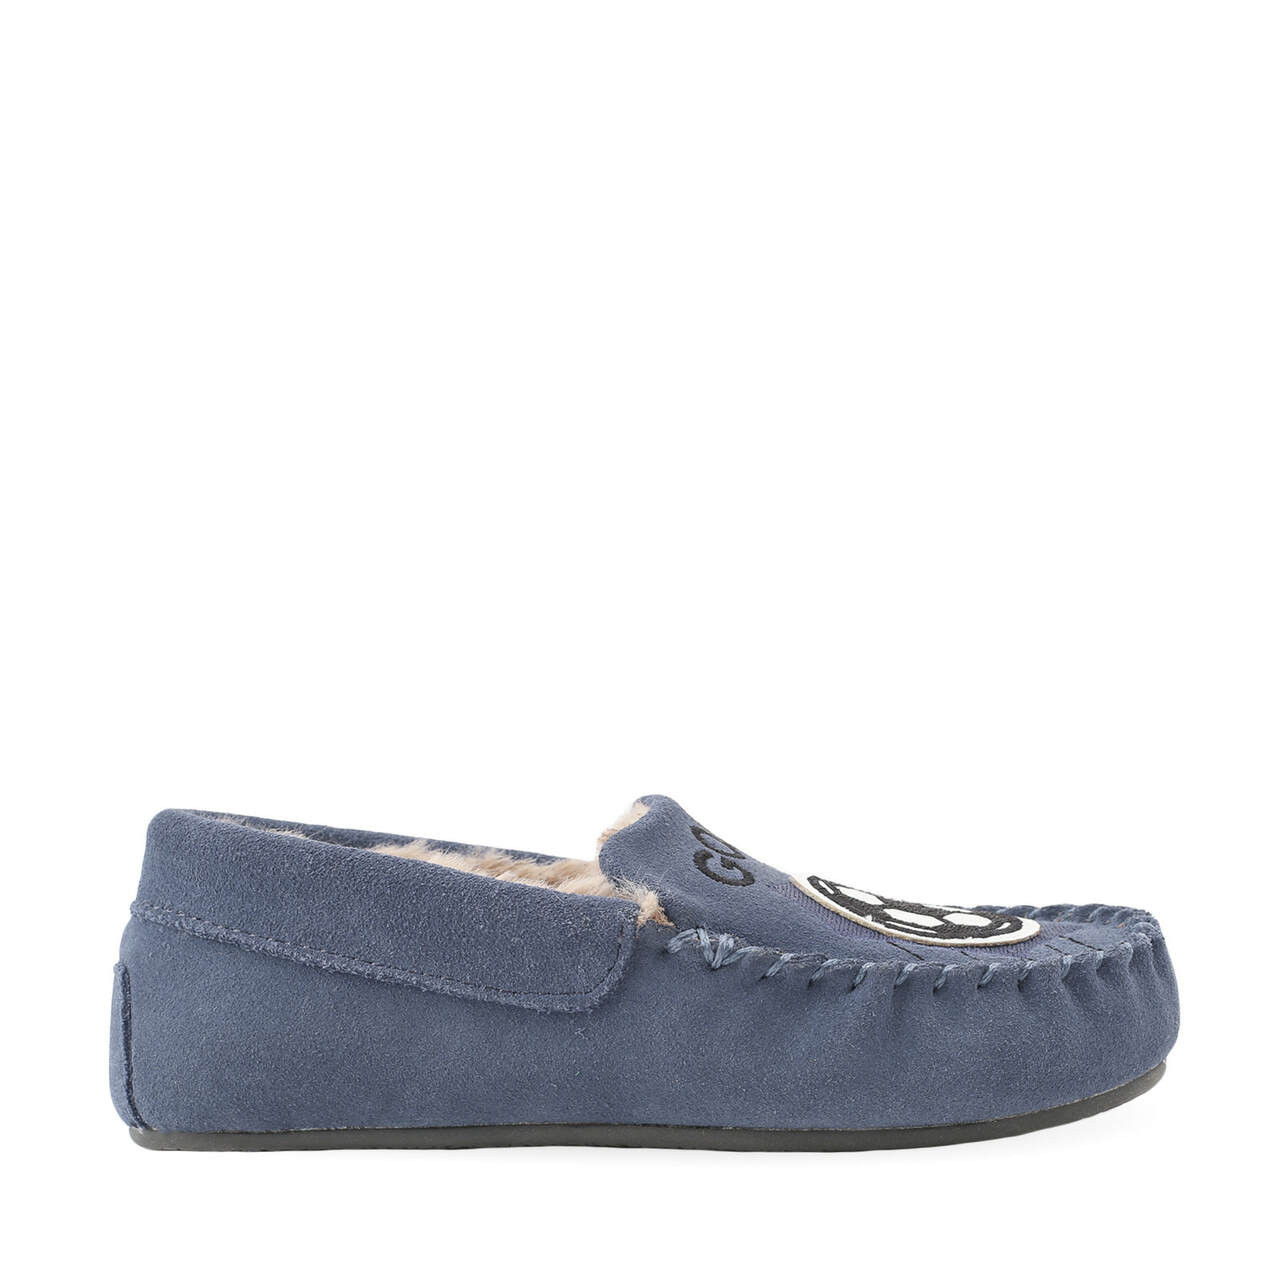 Snuggle, Blue suede football slip-on slippers